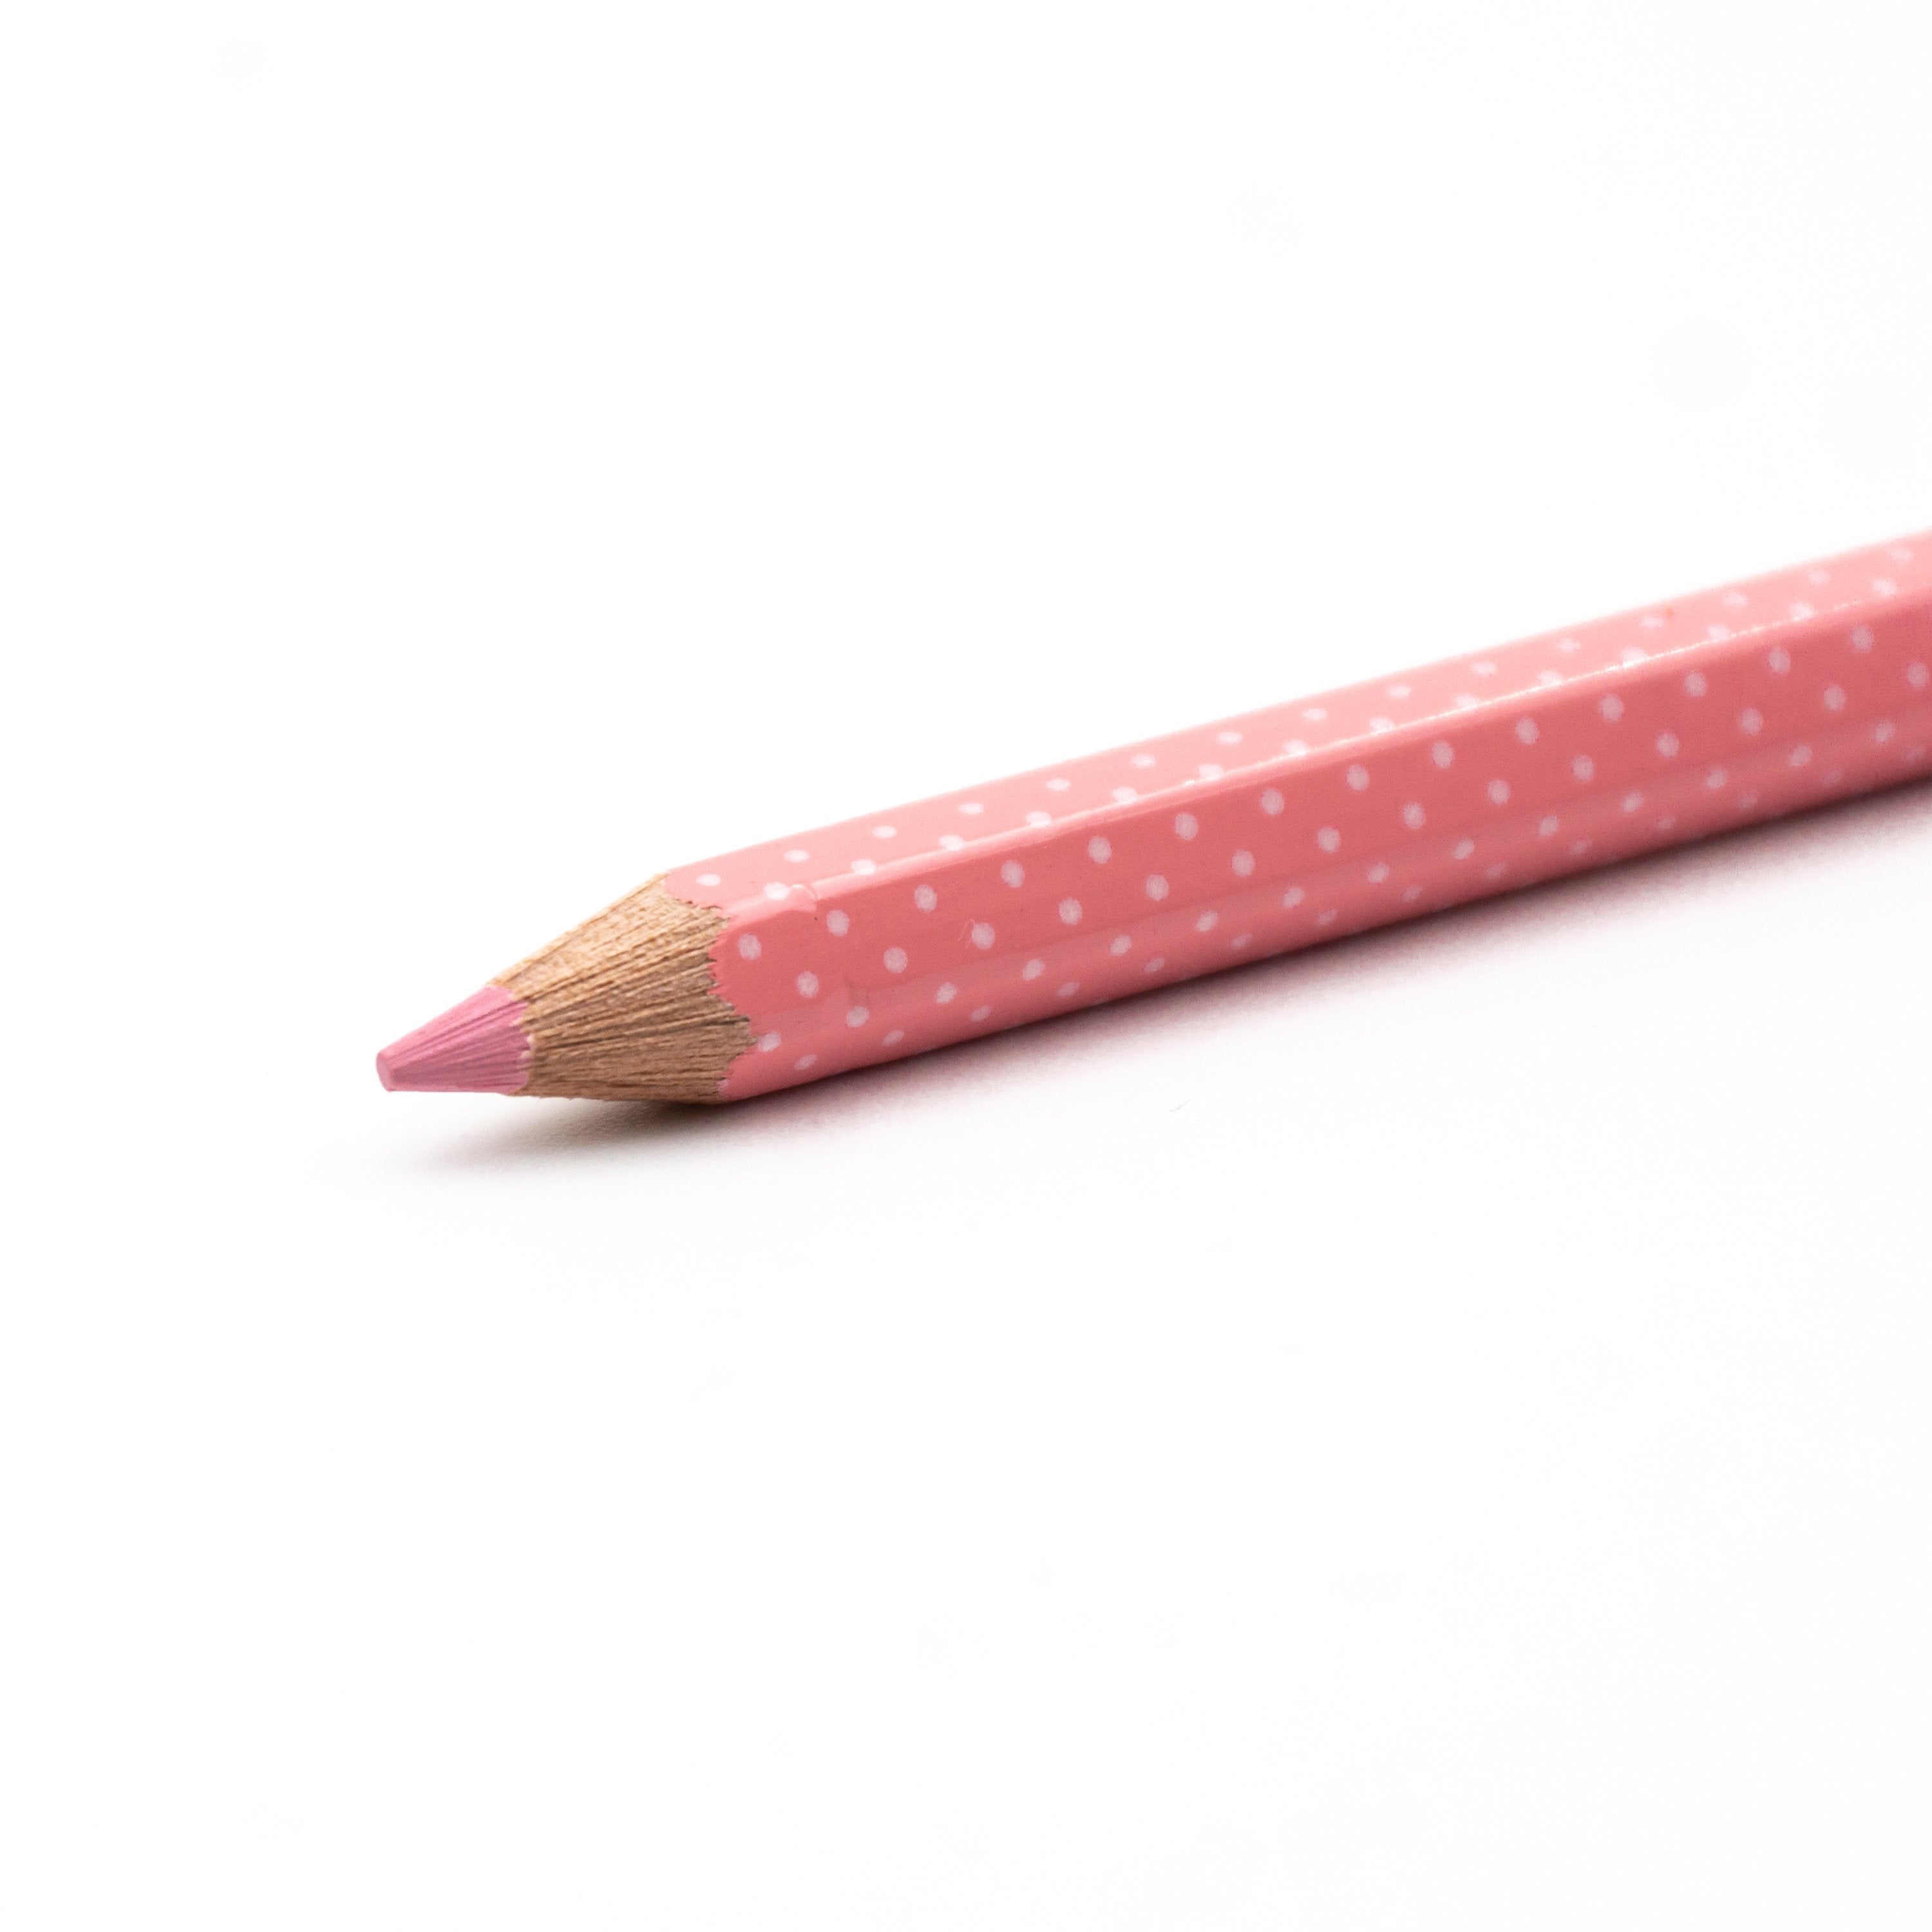 CLV - Water Soluble Pencil (Pink) - 0